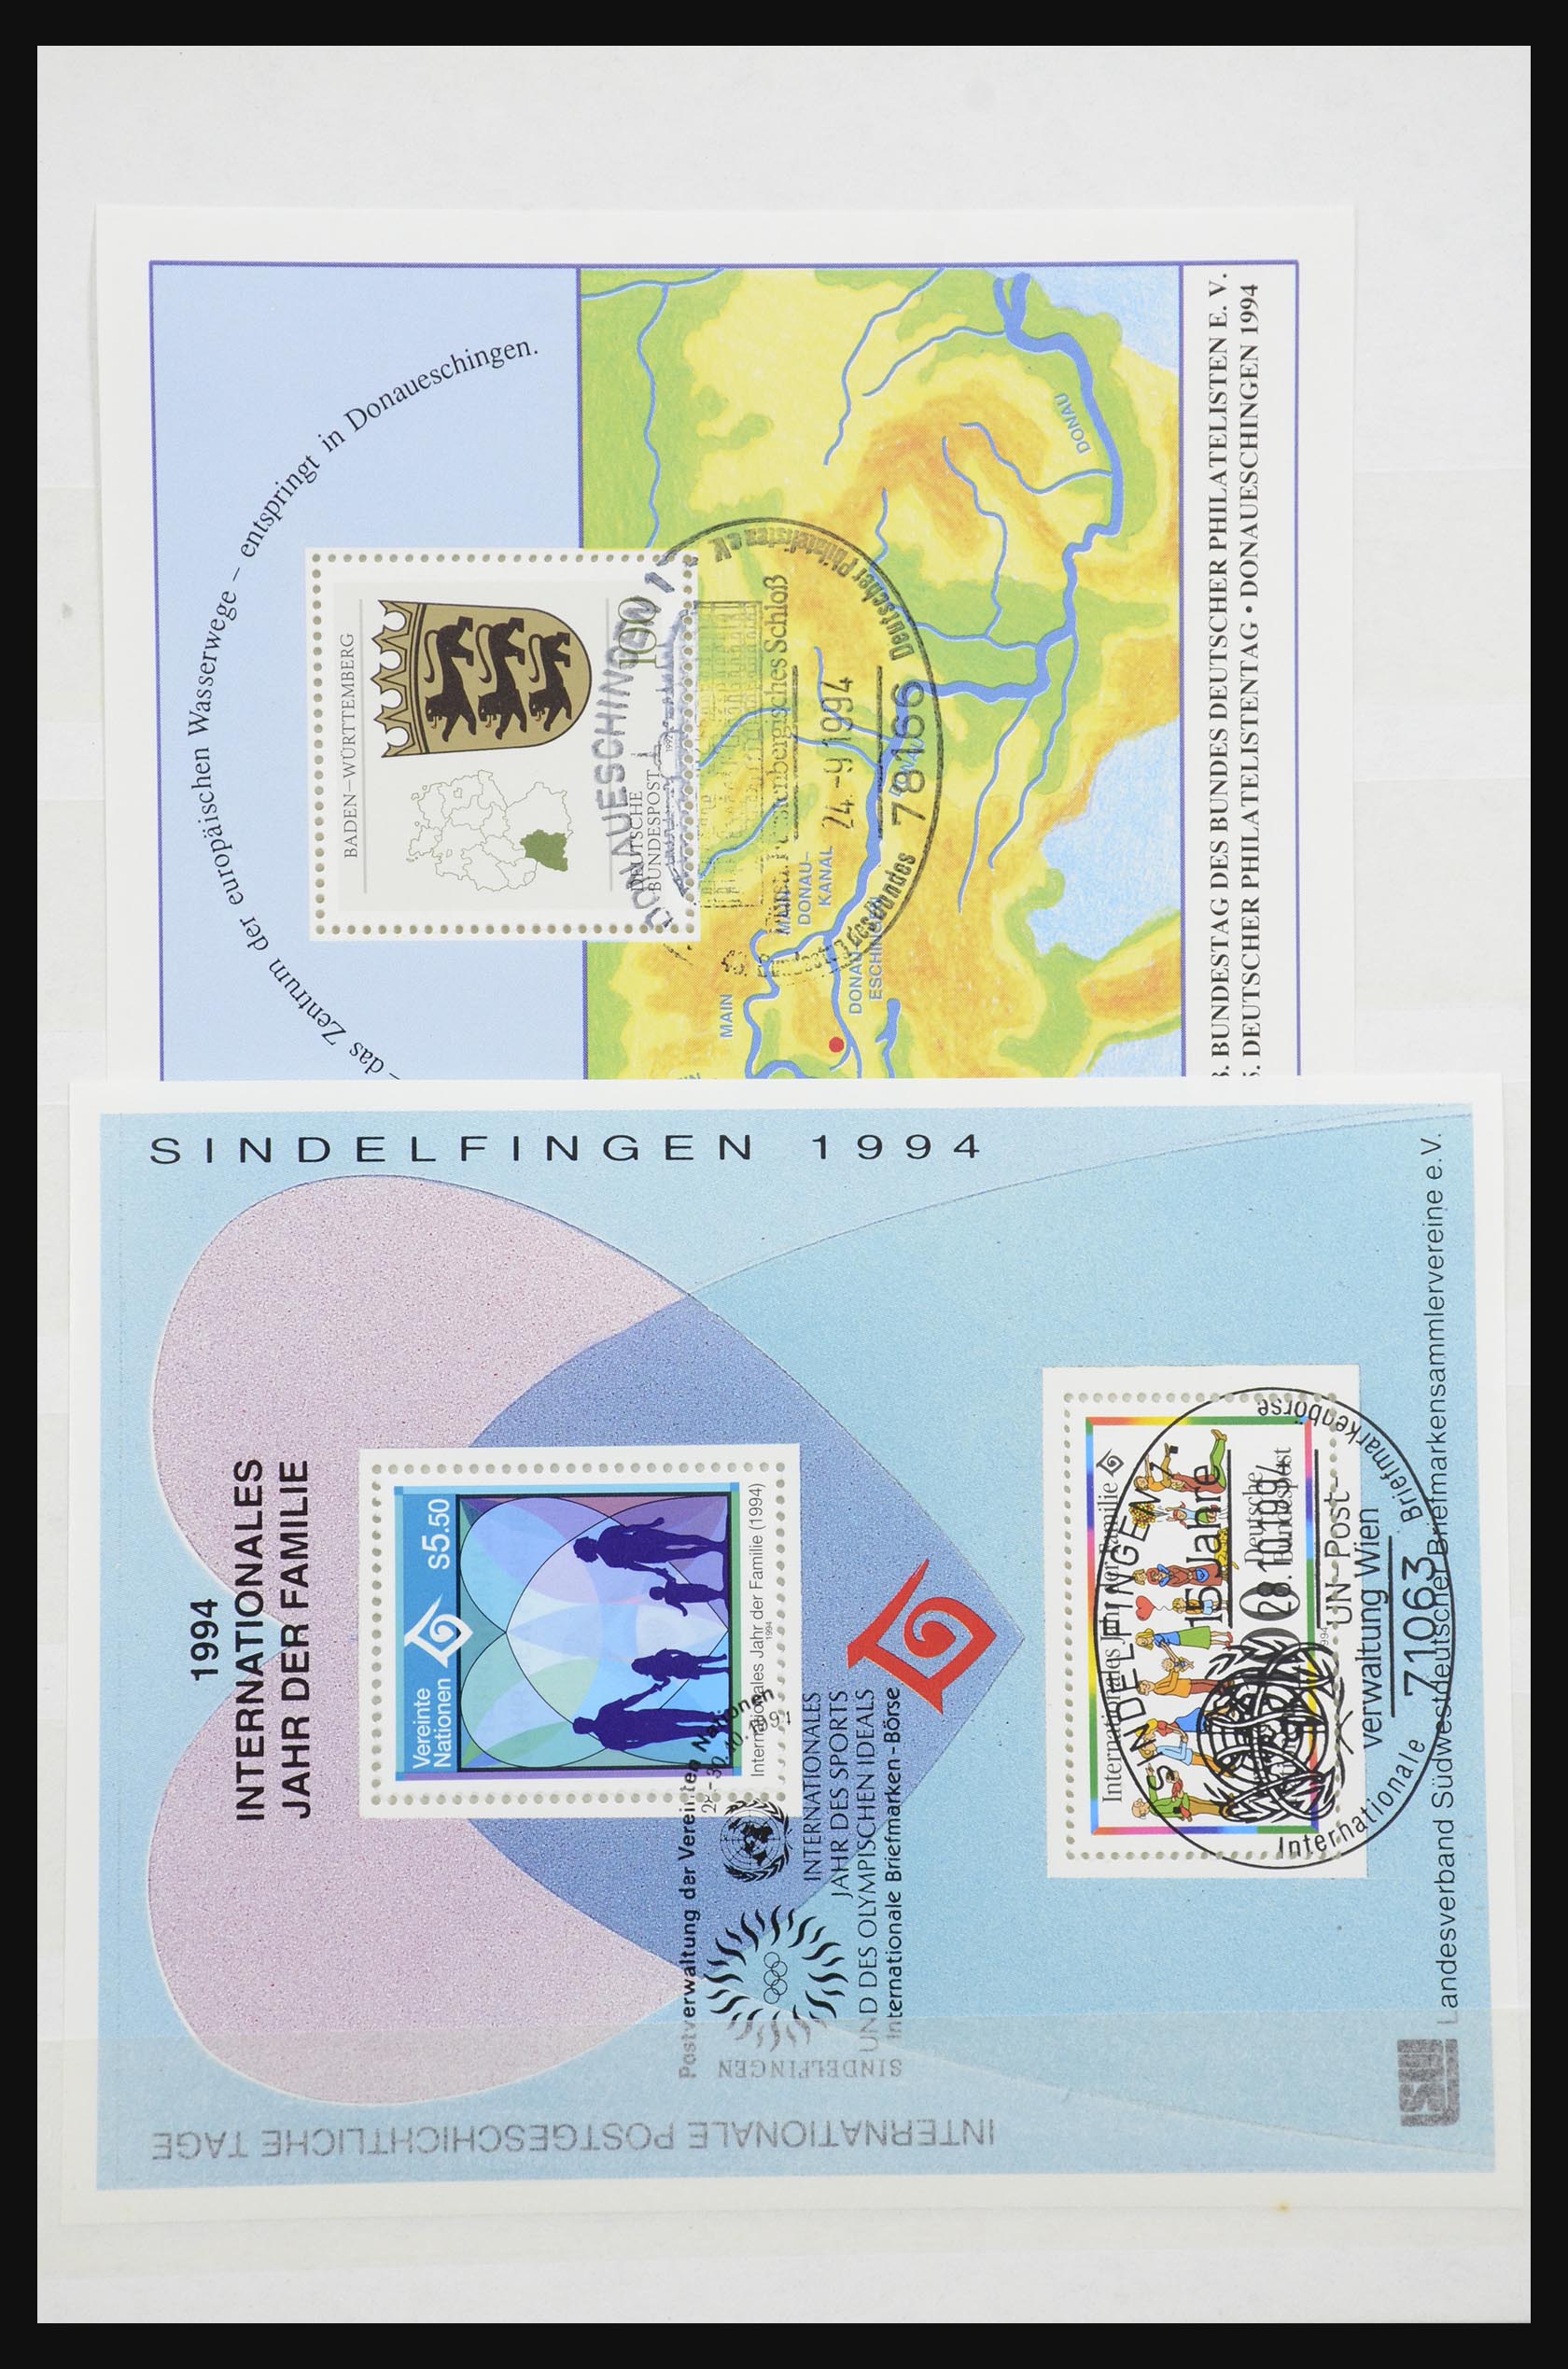 32050 038 - 32050 Bundespost special sheets 1980-2010.